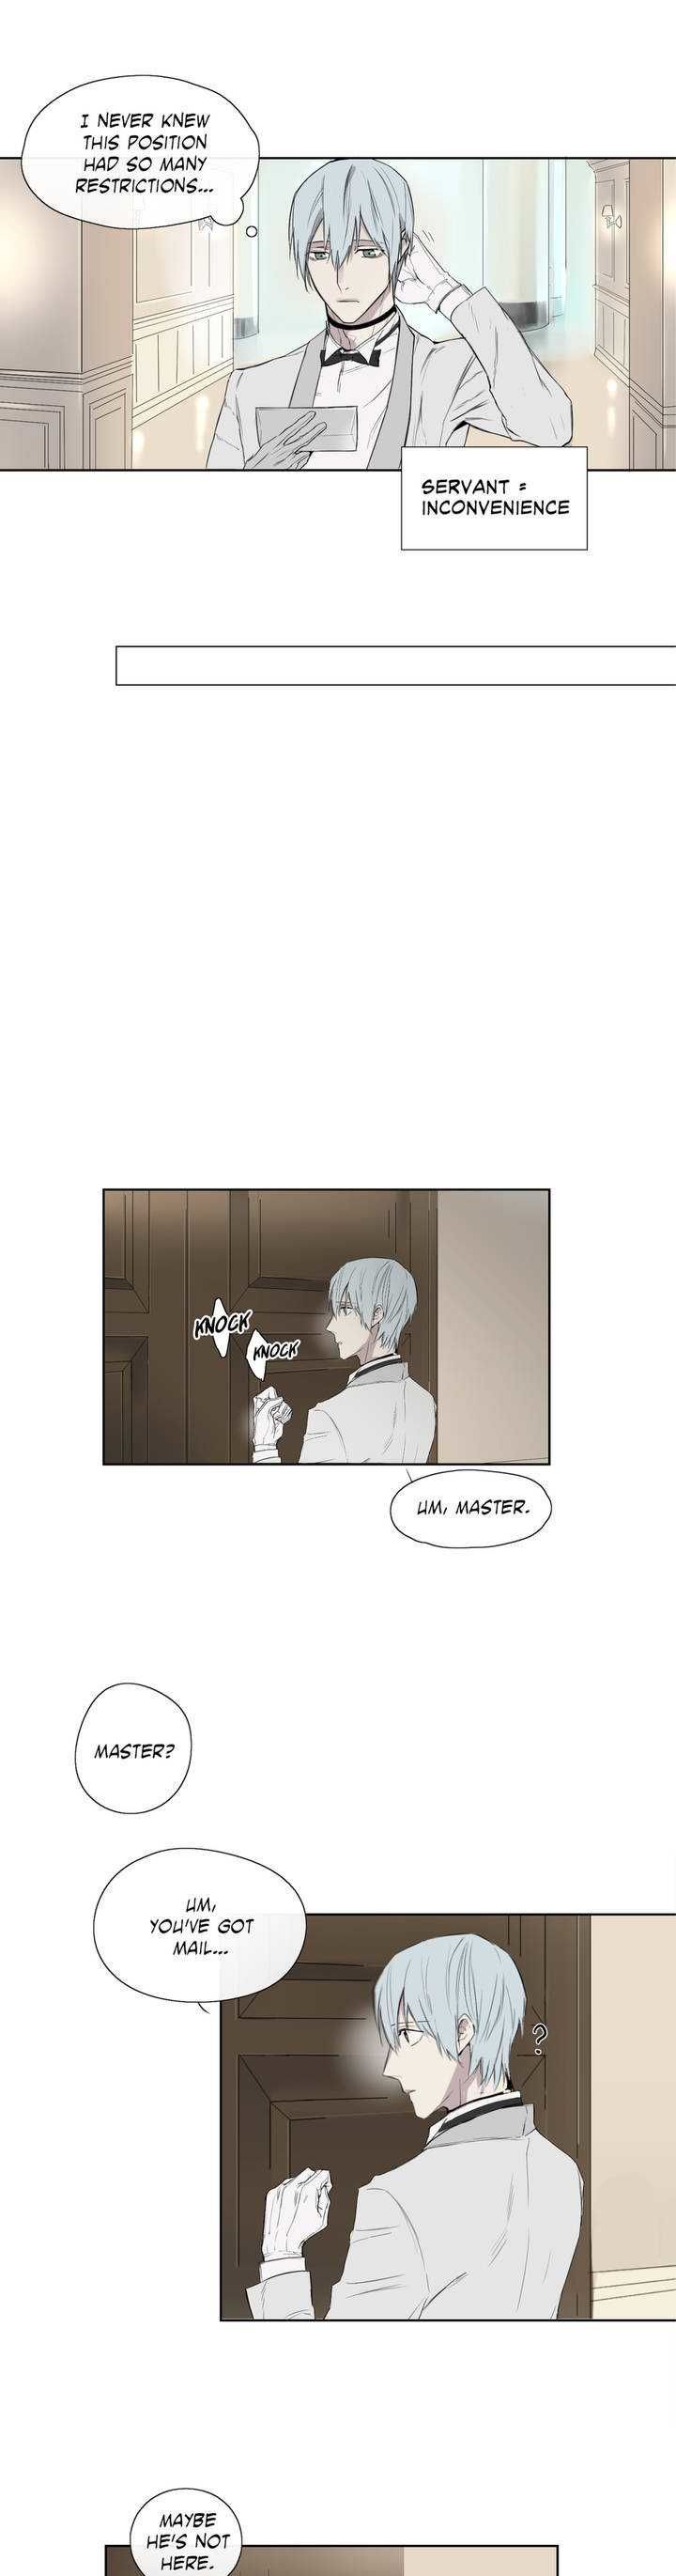 Royal Servant - Chapter 1 Page 16